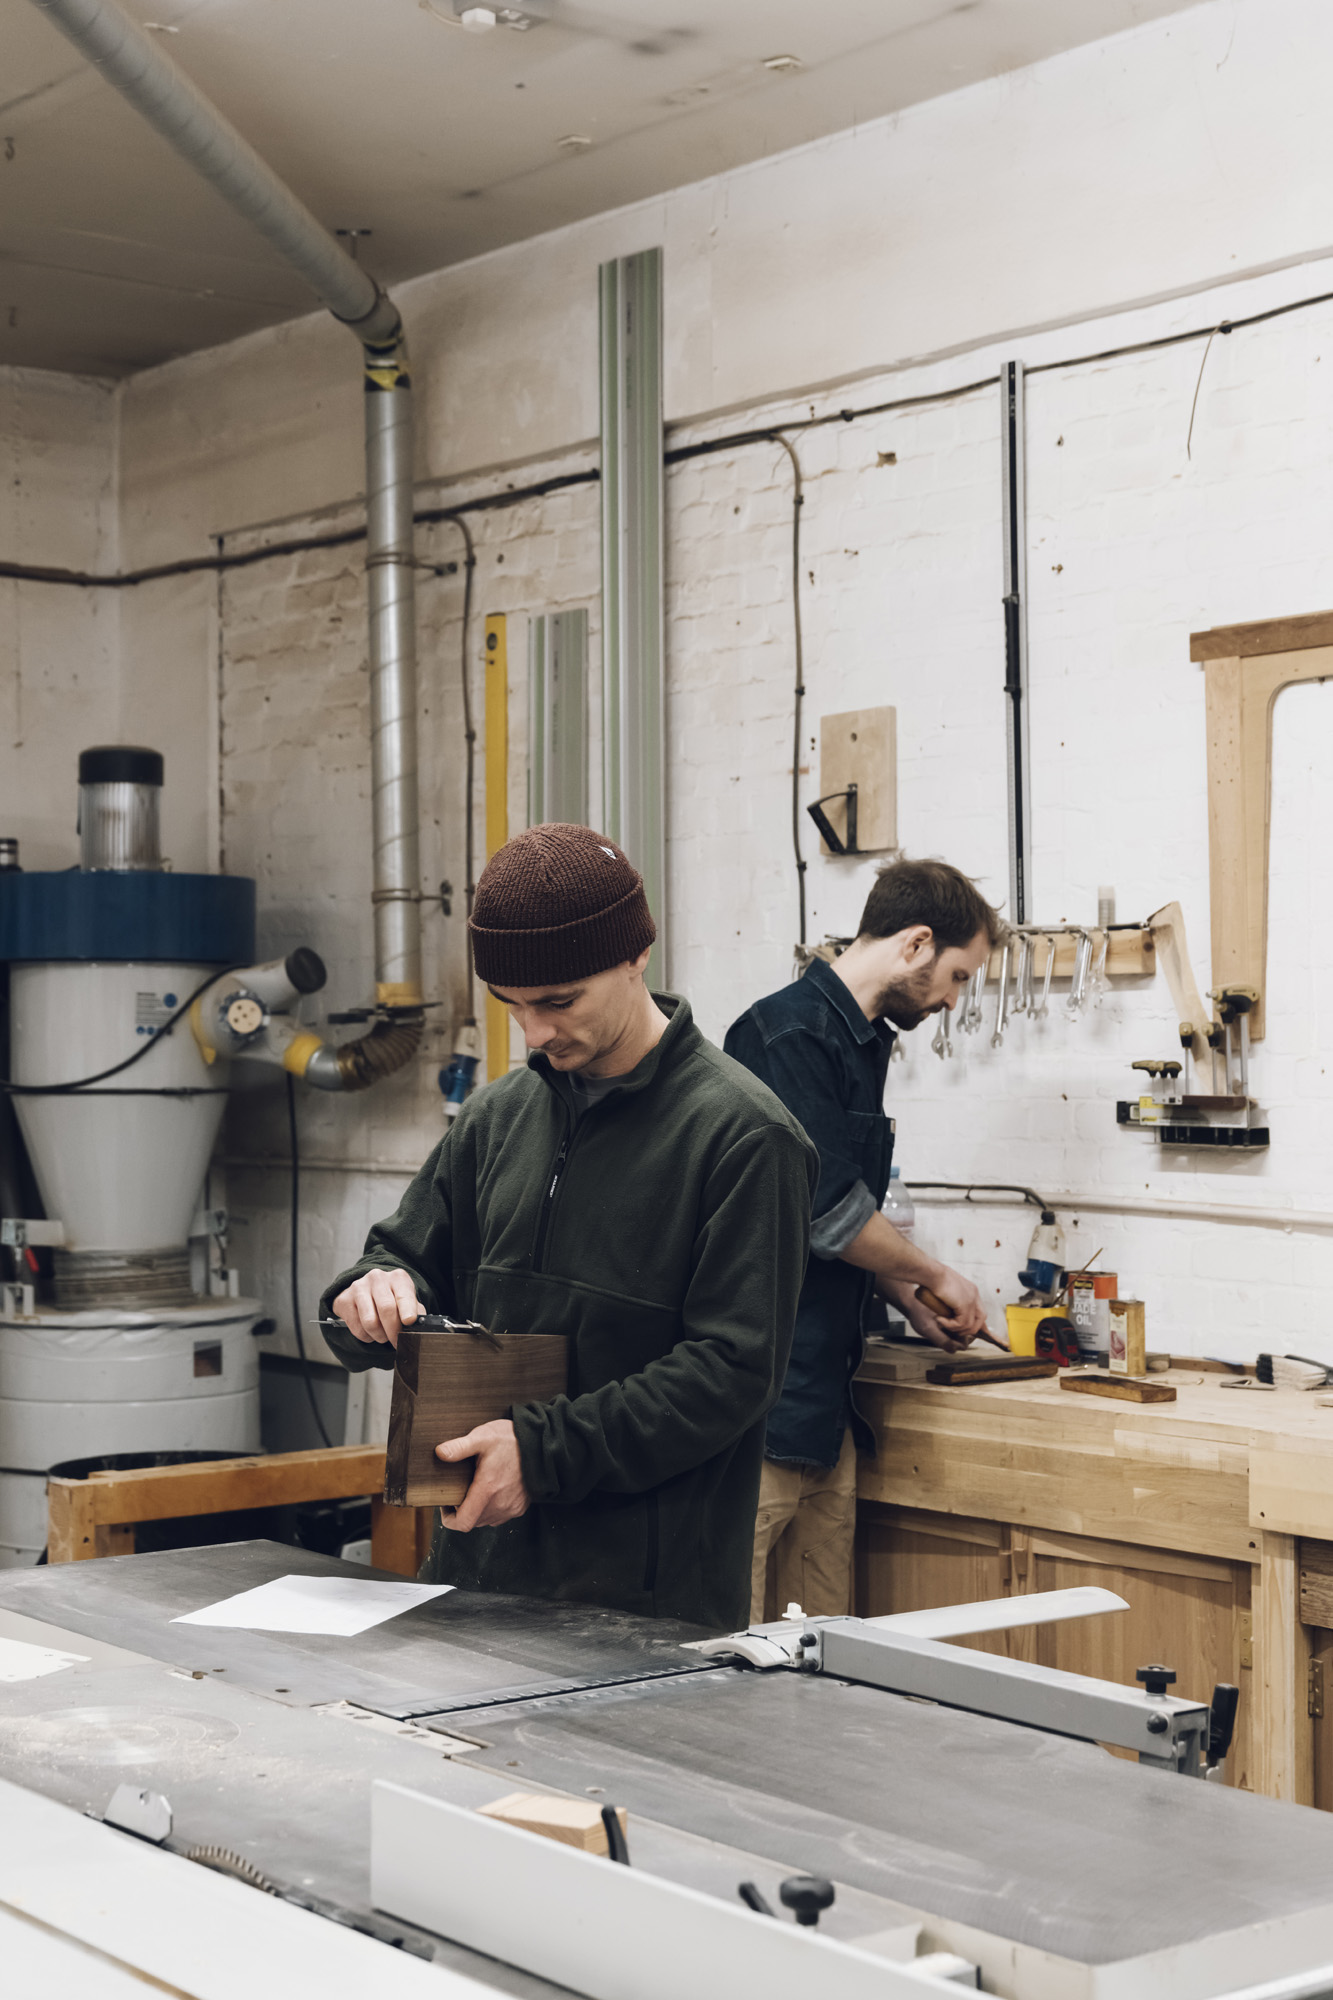 Woodworking in a workshop